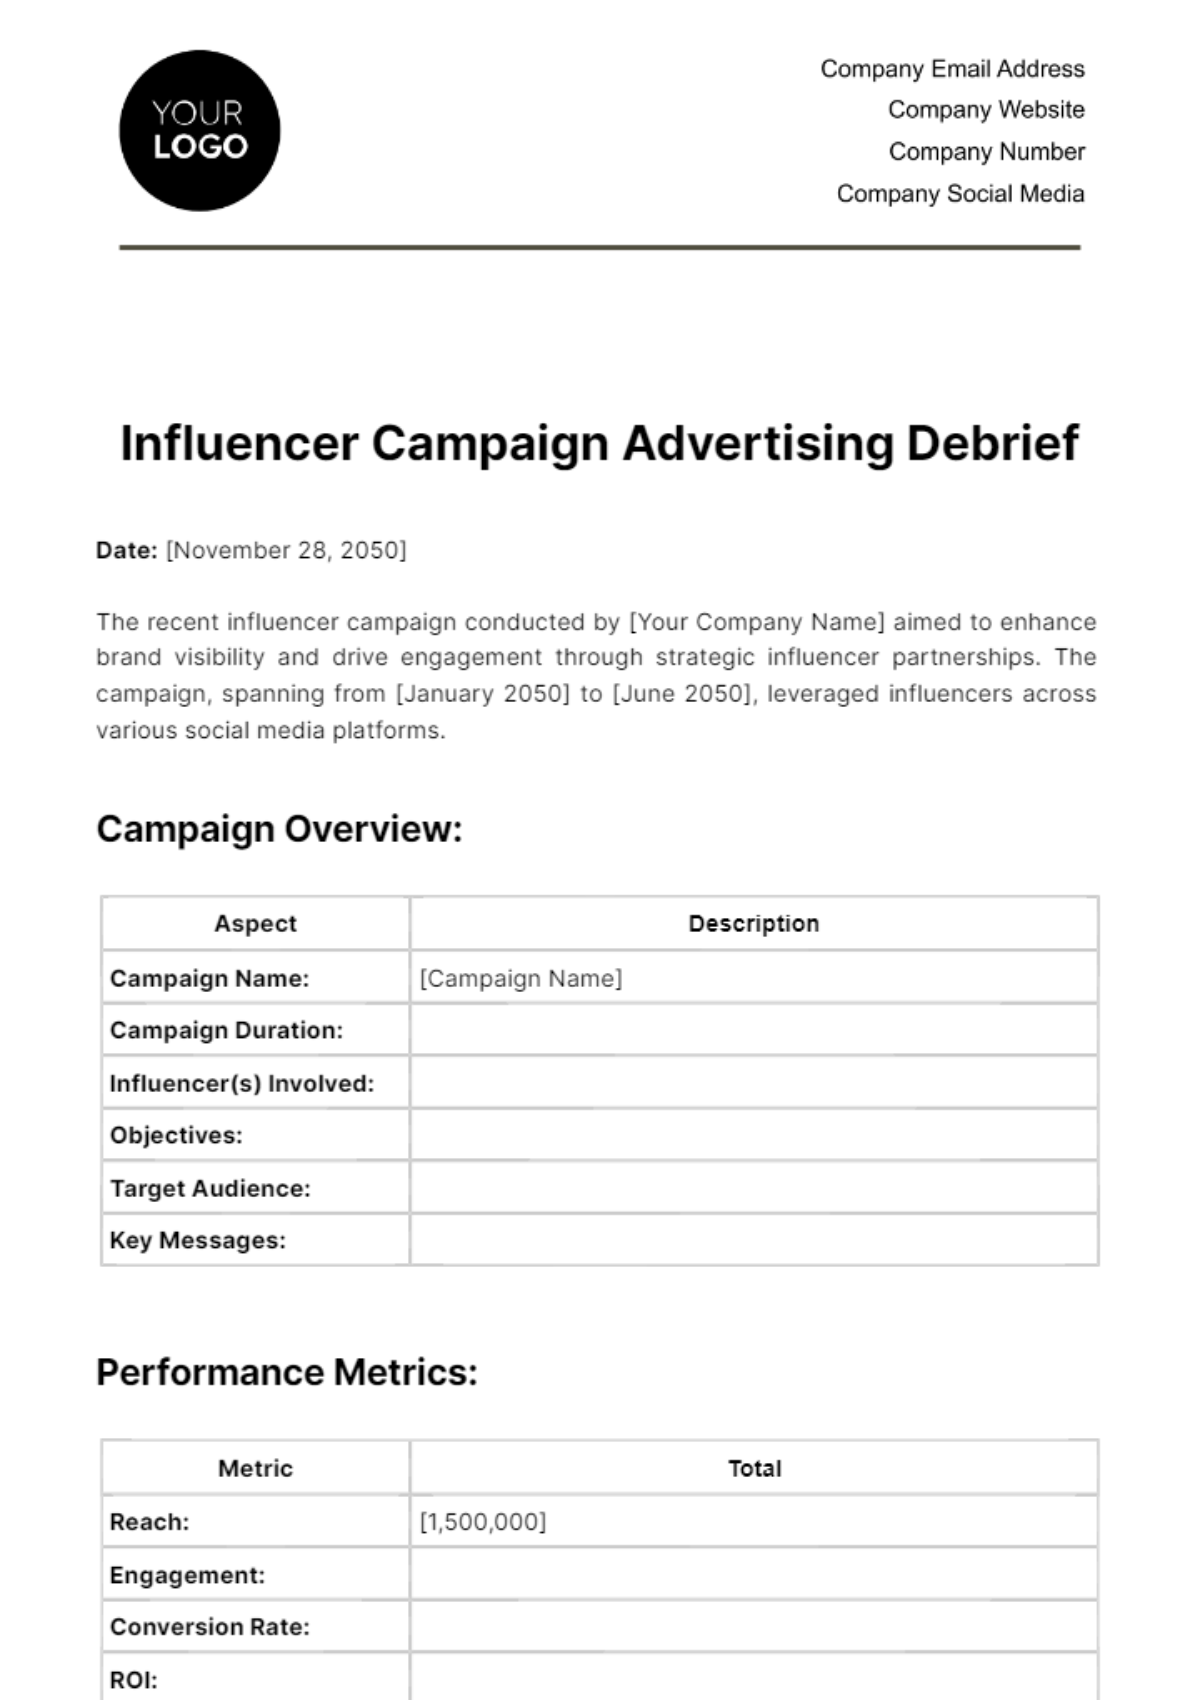 Free Influencer Campaign Advertising Debrief Template